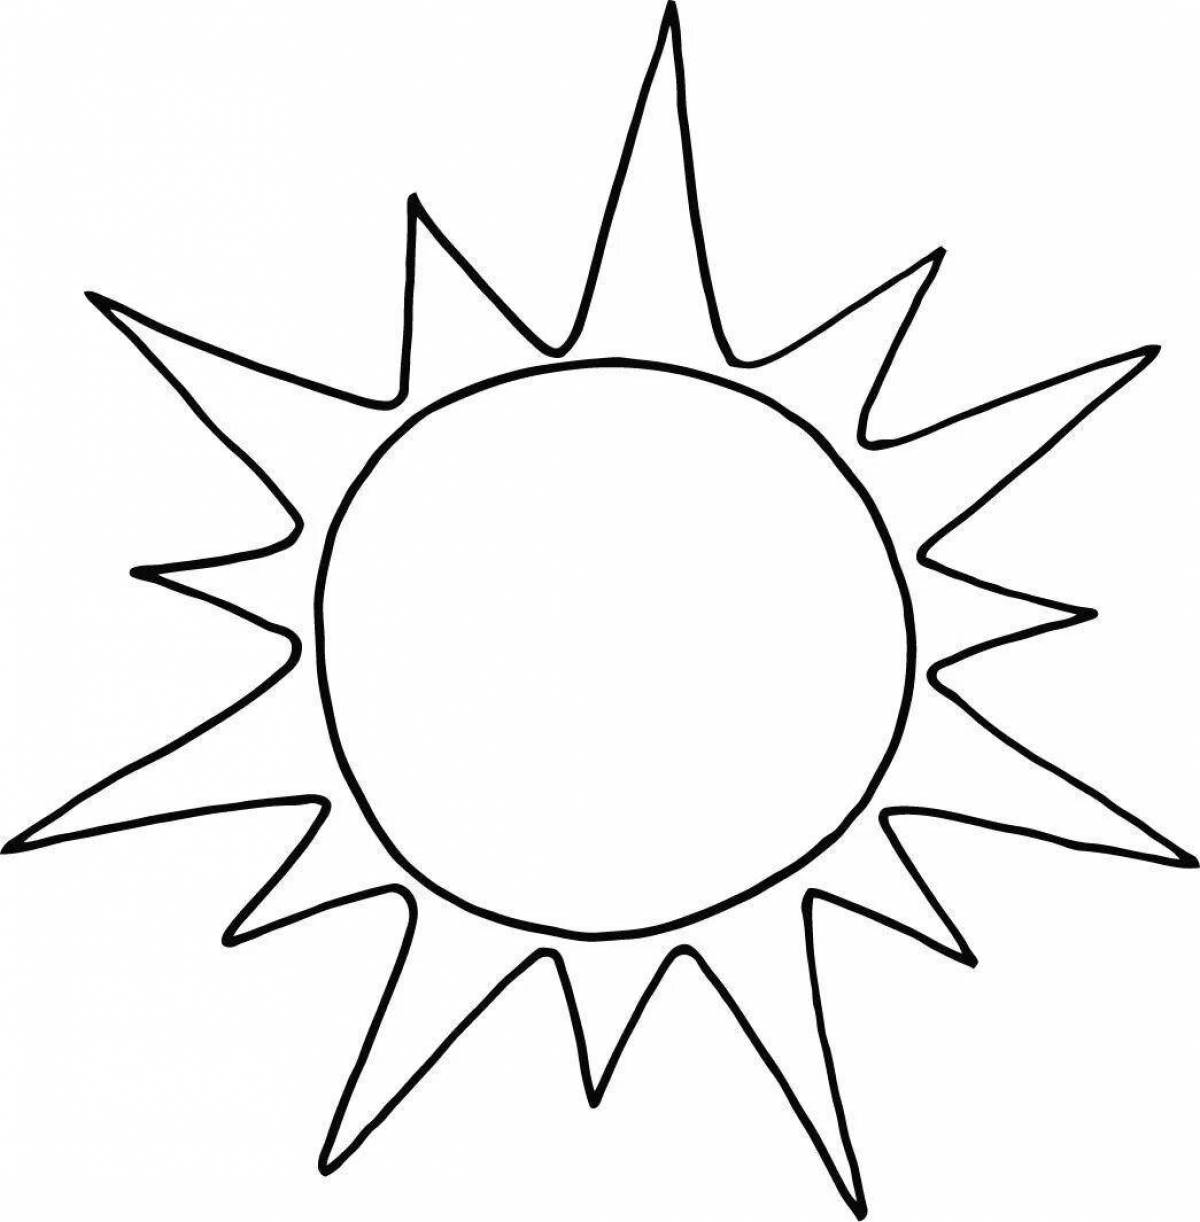 Animated sun coloring book for 4-5 year olds